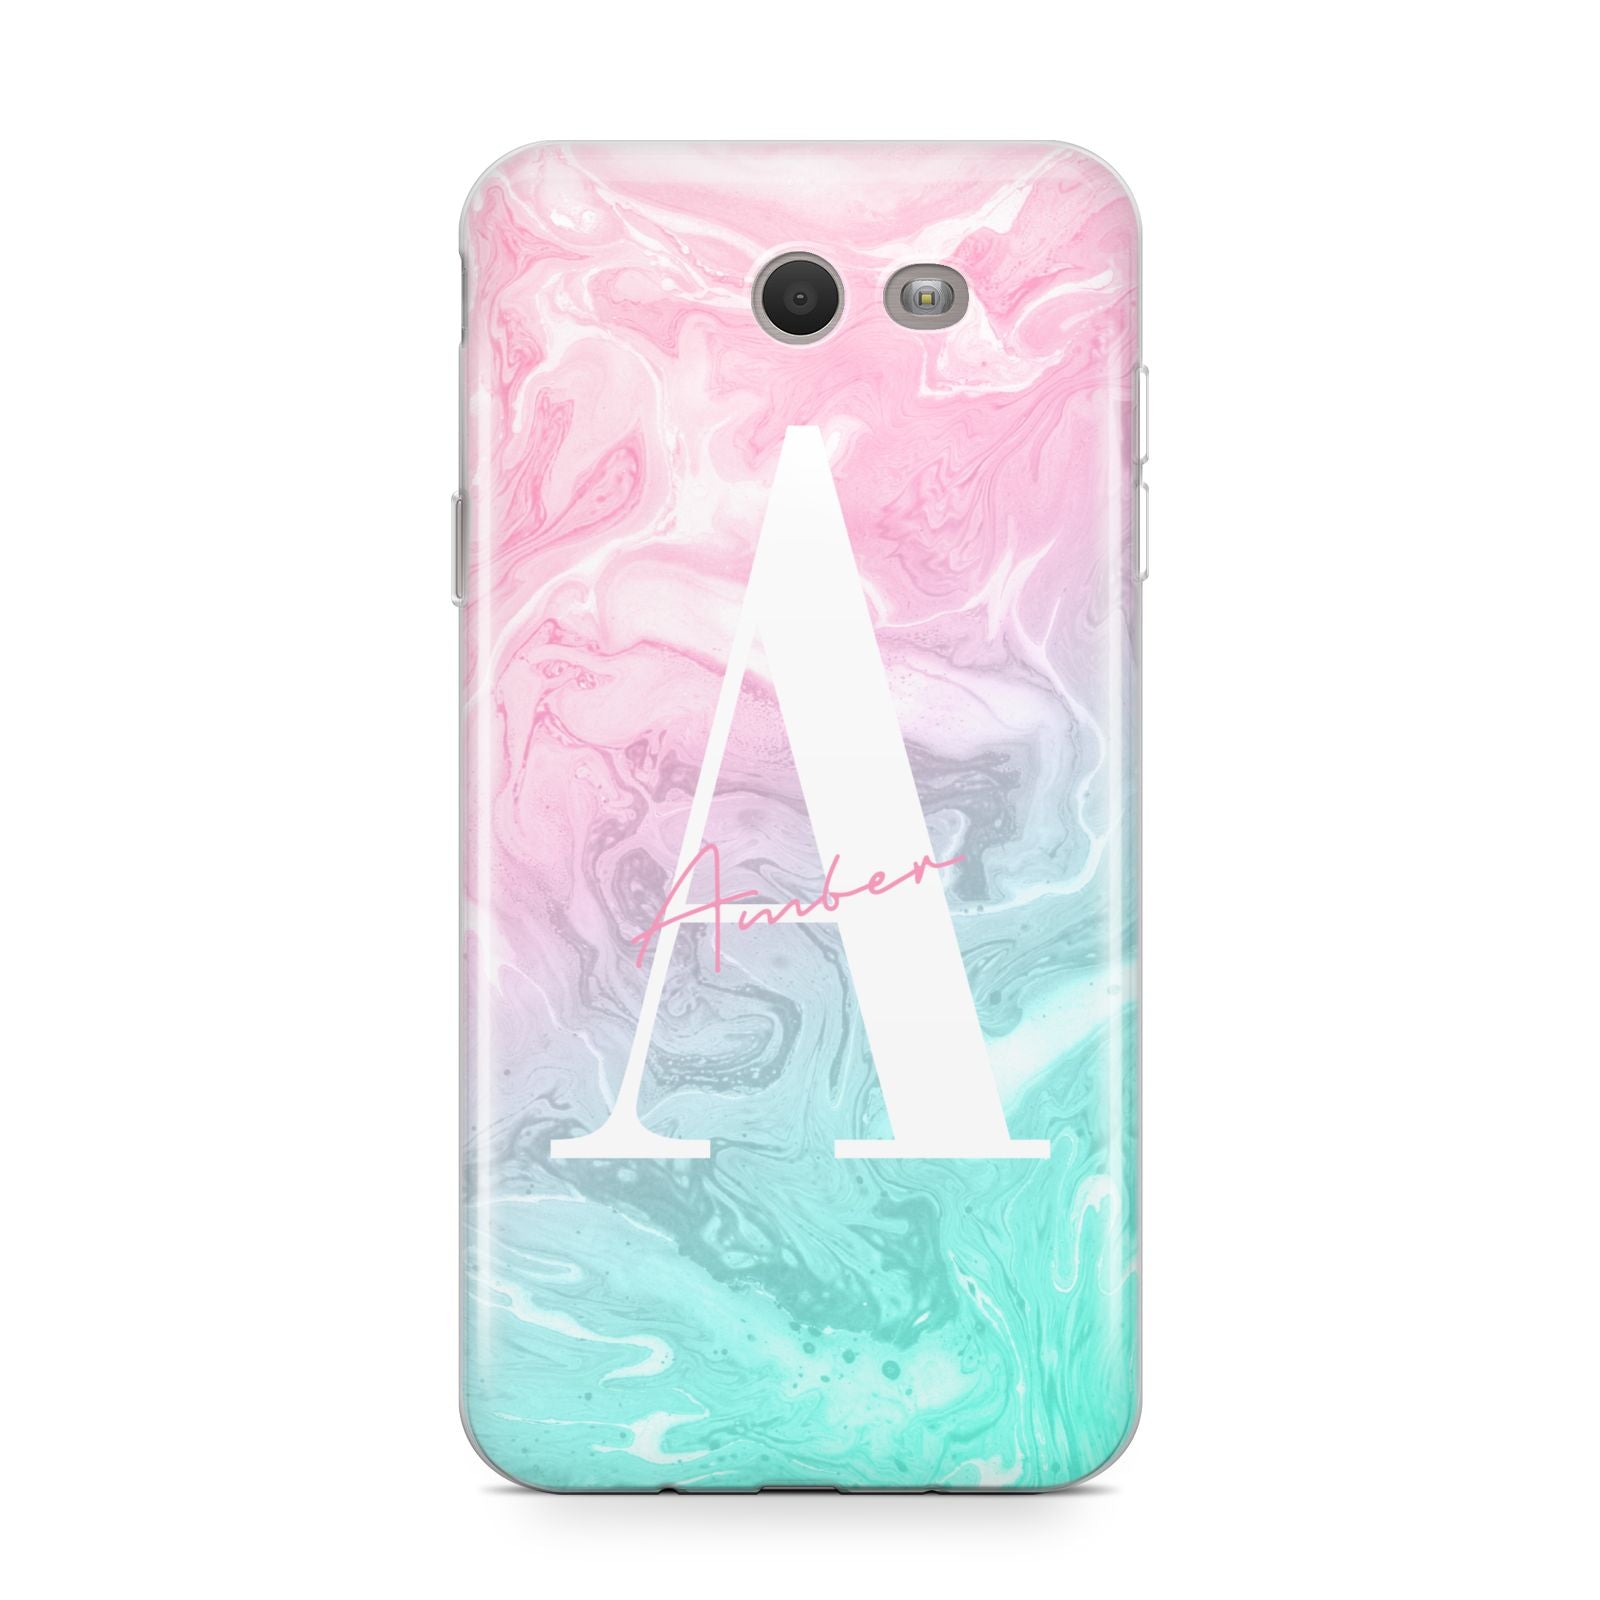 Monogrammed Pink Turquoise Pastel Marble Samsung Galaxy J7 2017 Case